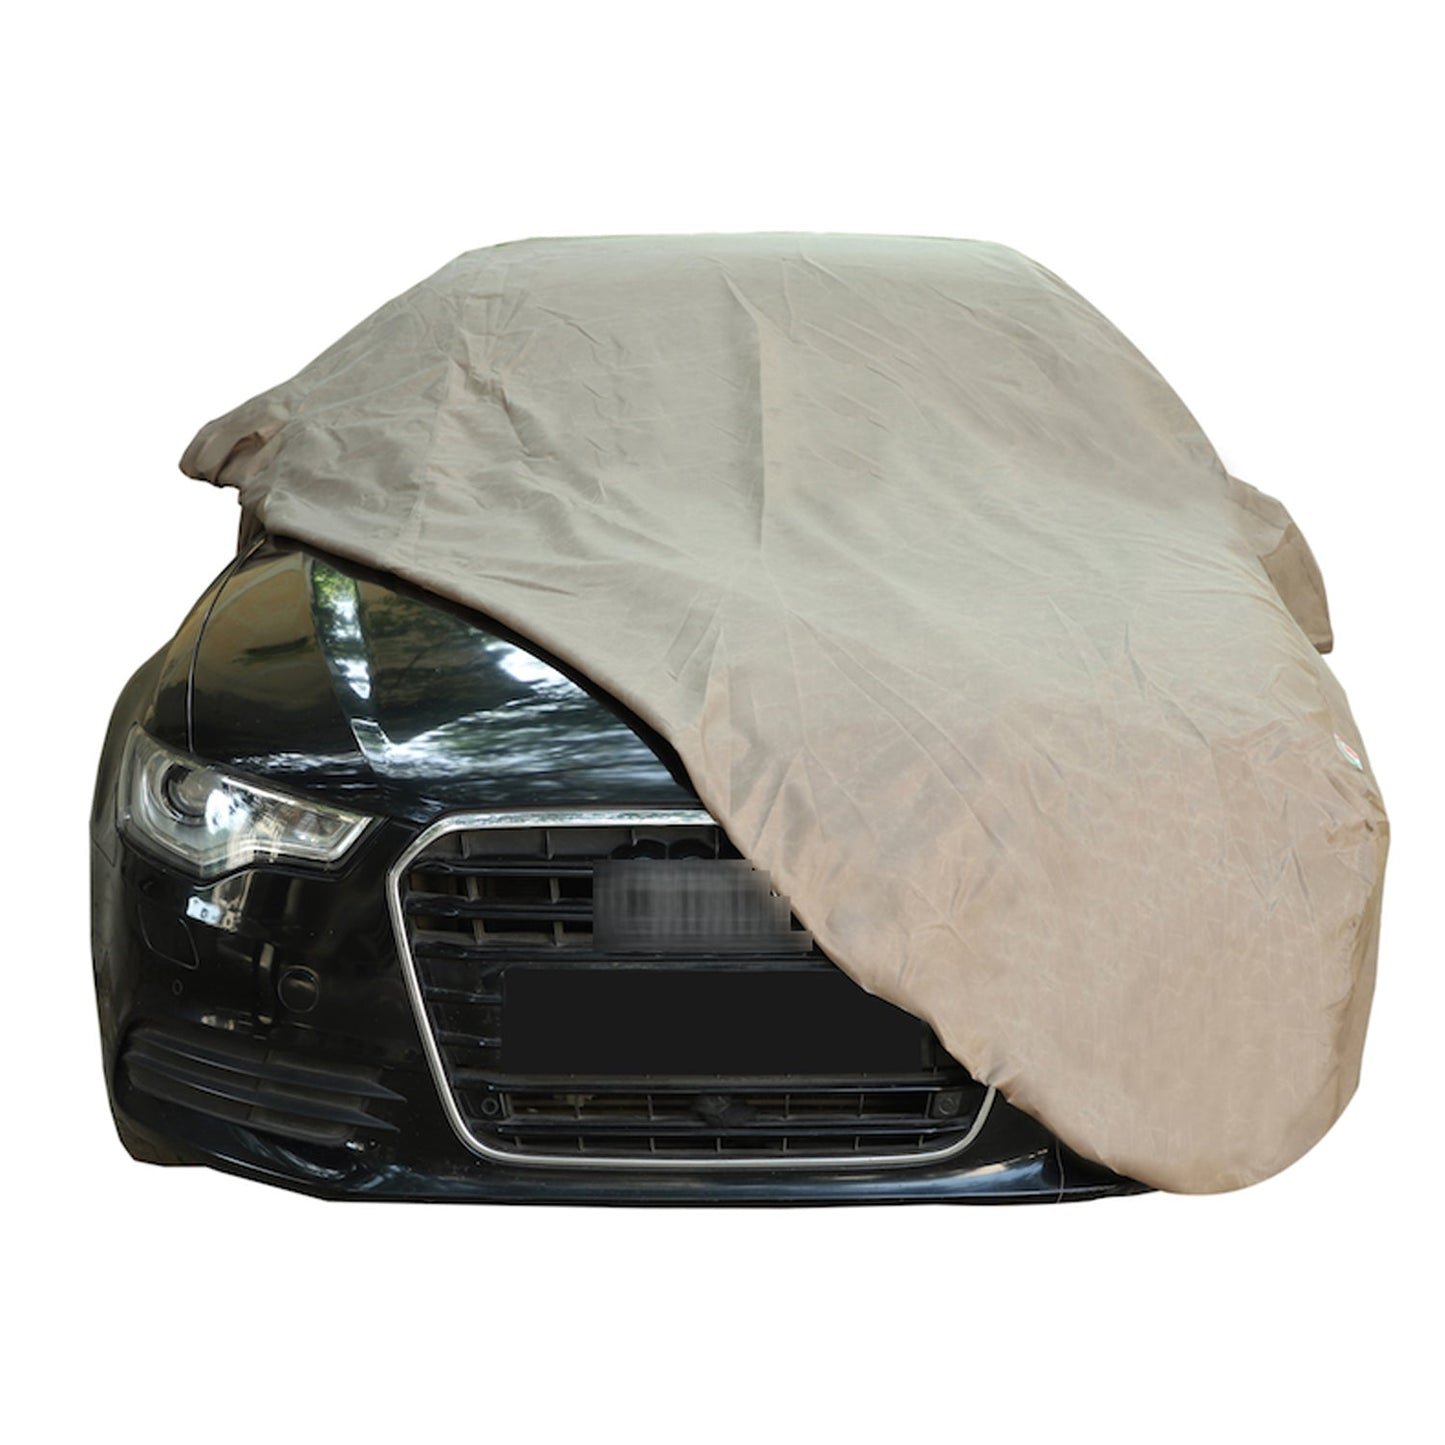 Oshotto Brown 100% Waterproof Car Body Cover with Mirror Pockets For Toyota Etios Cross